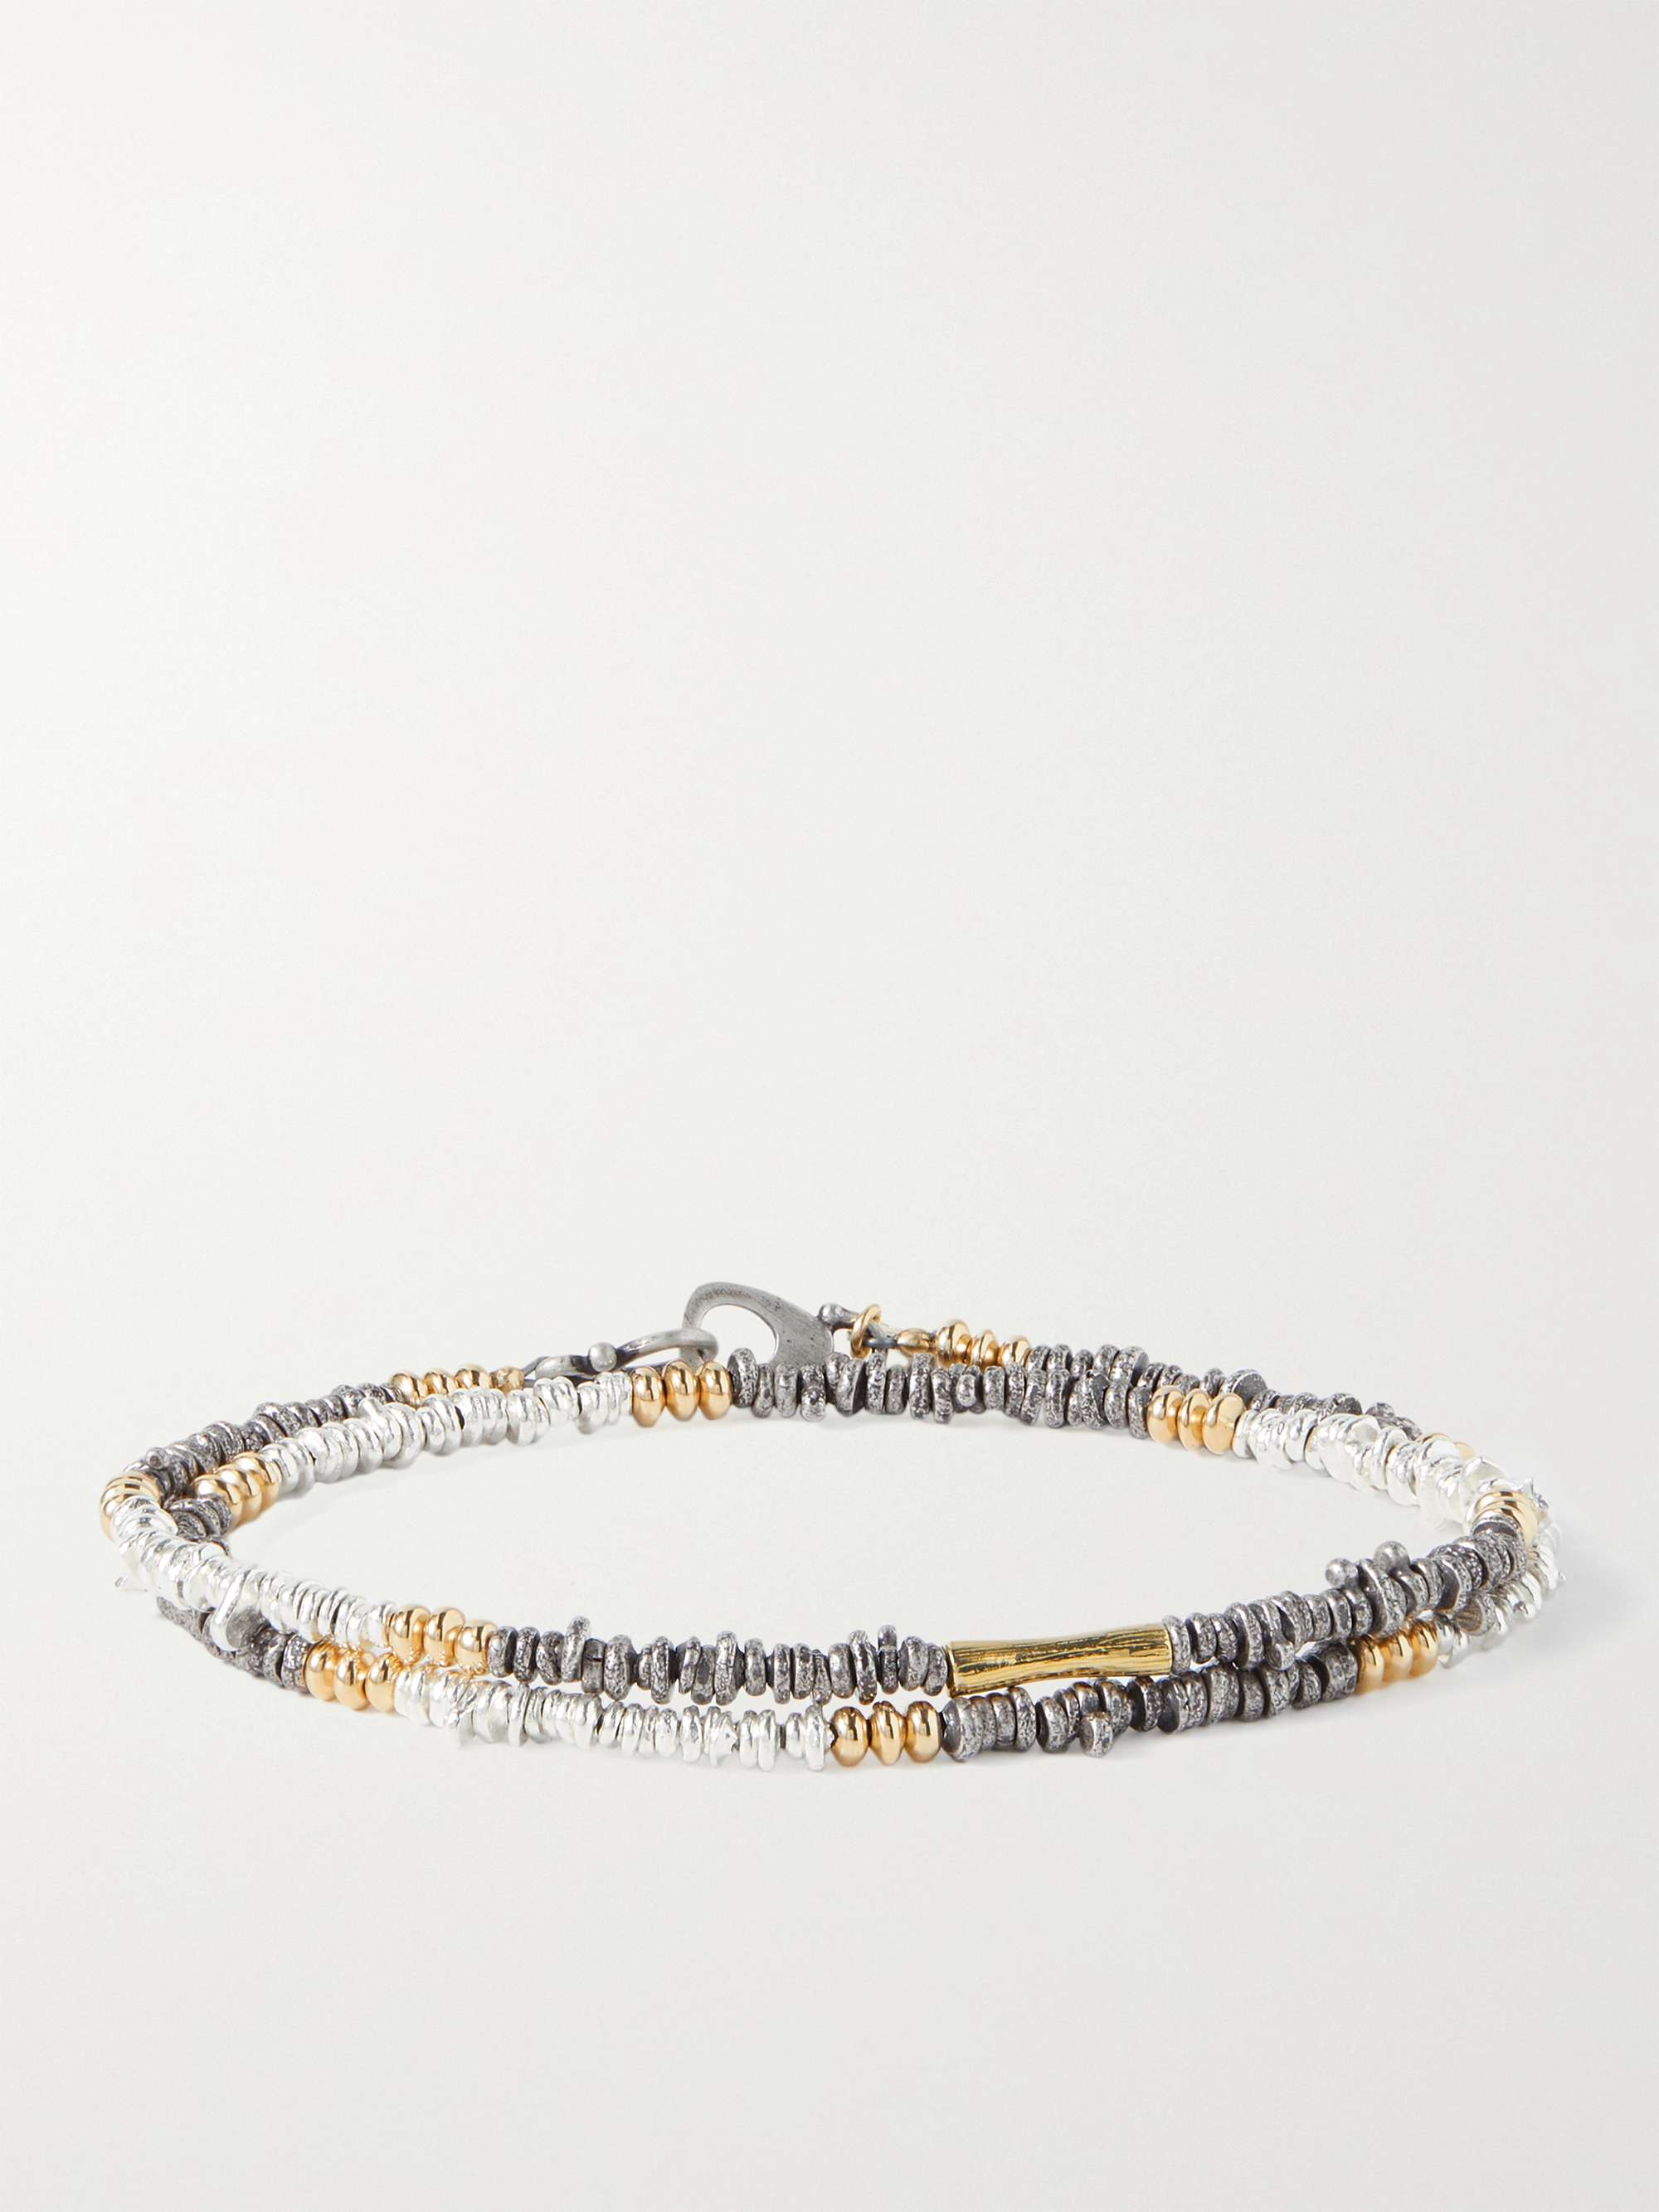 PEYOTE BIRD Counterpoint Sterling Silver and Gold-Filled Wrap Bracelet